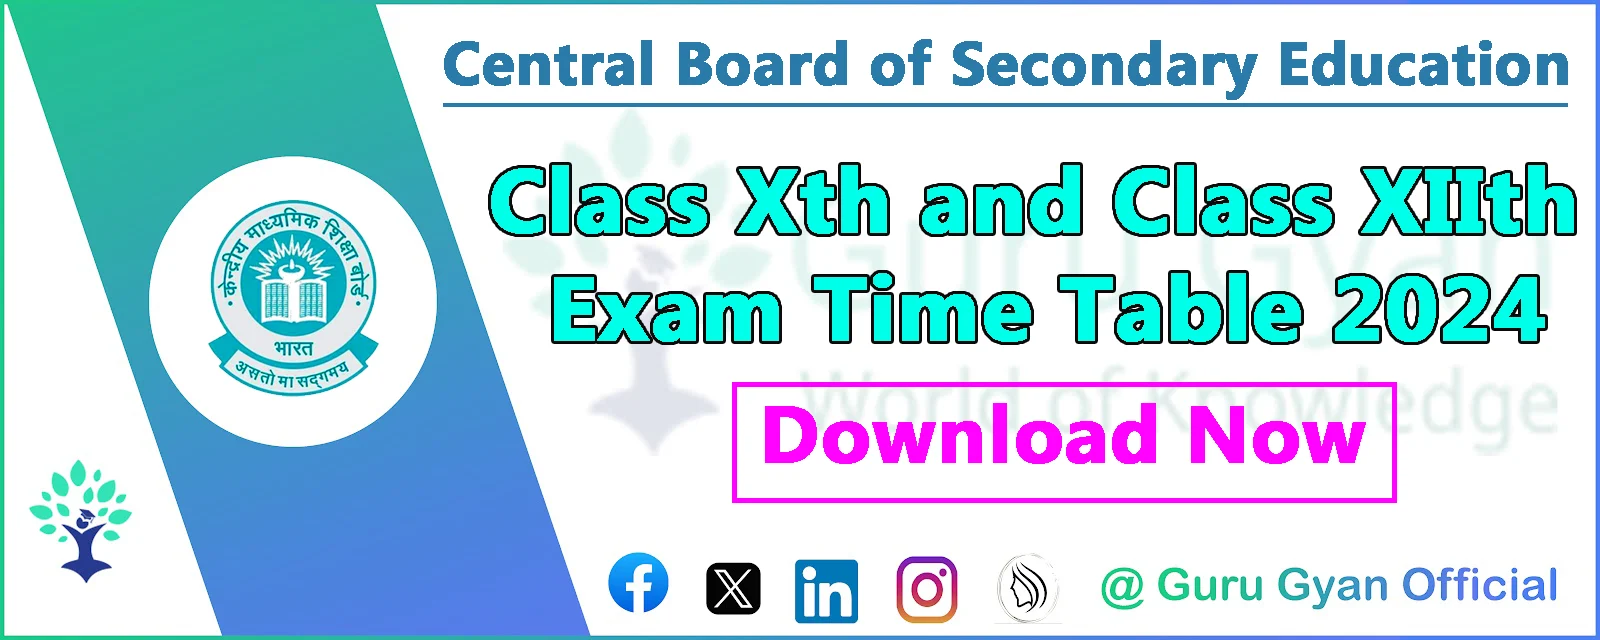 CBSE Board Class 10th, 12th Time Table 2024